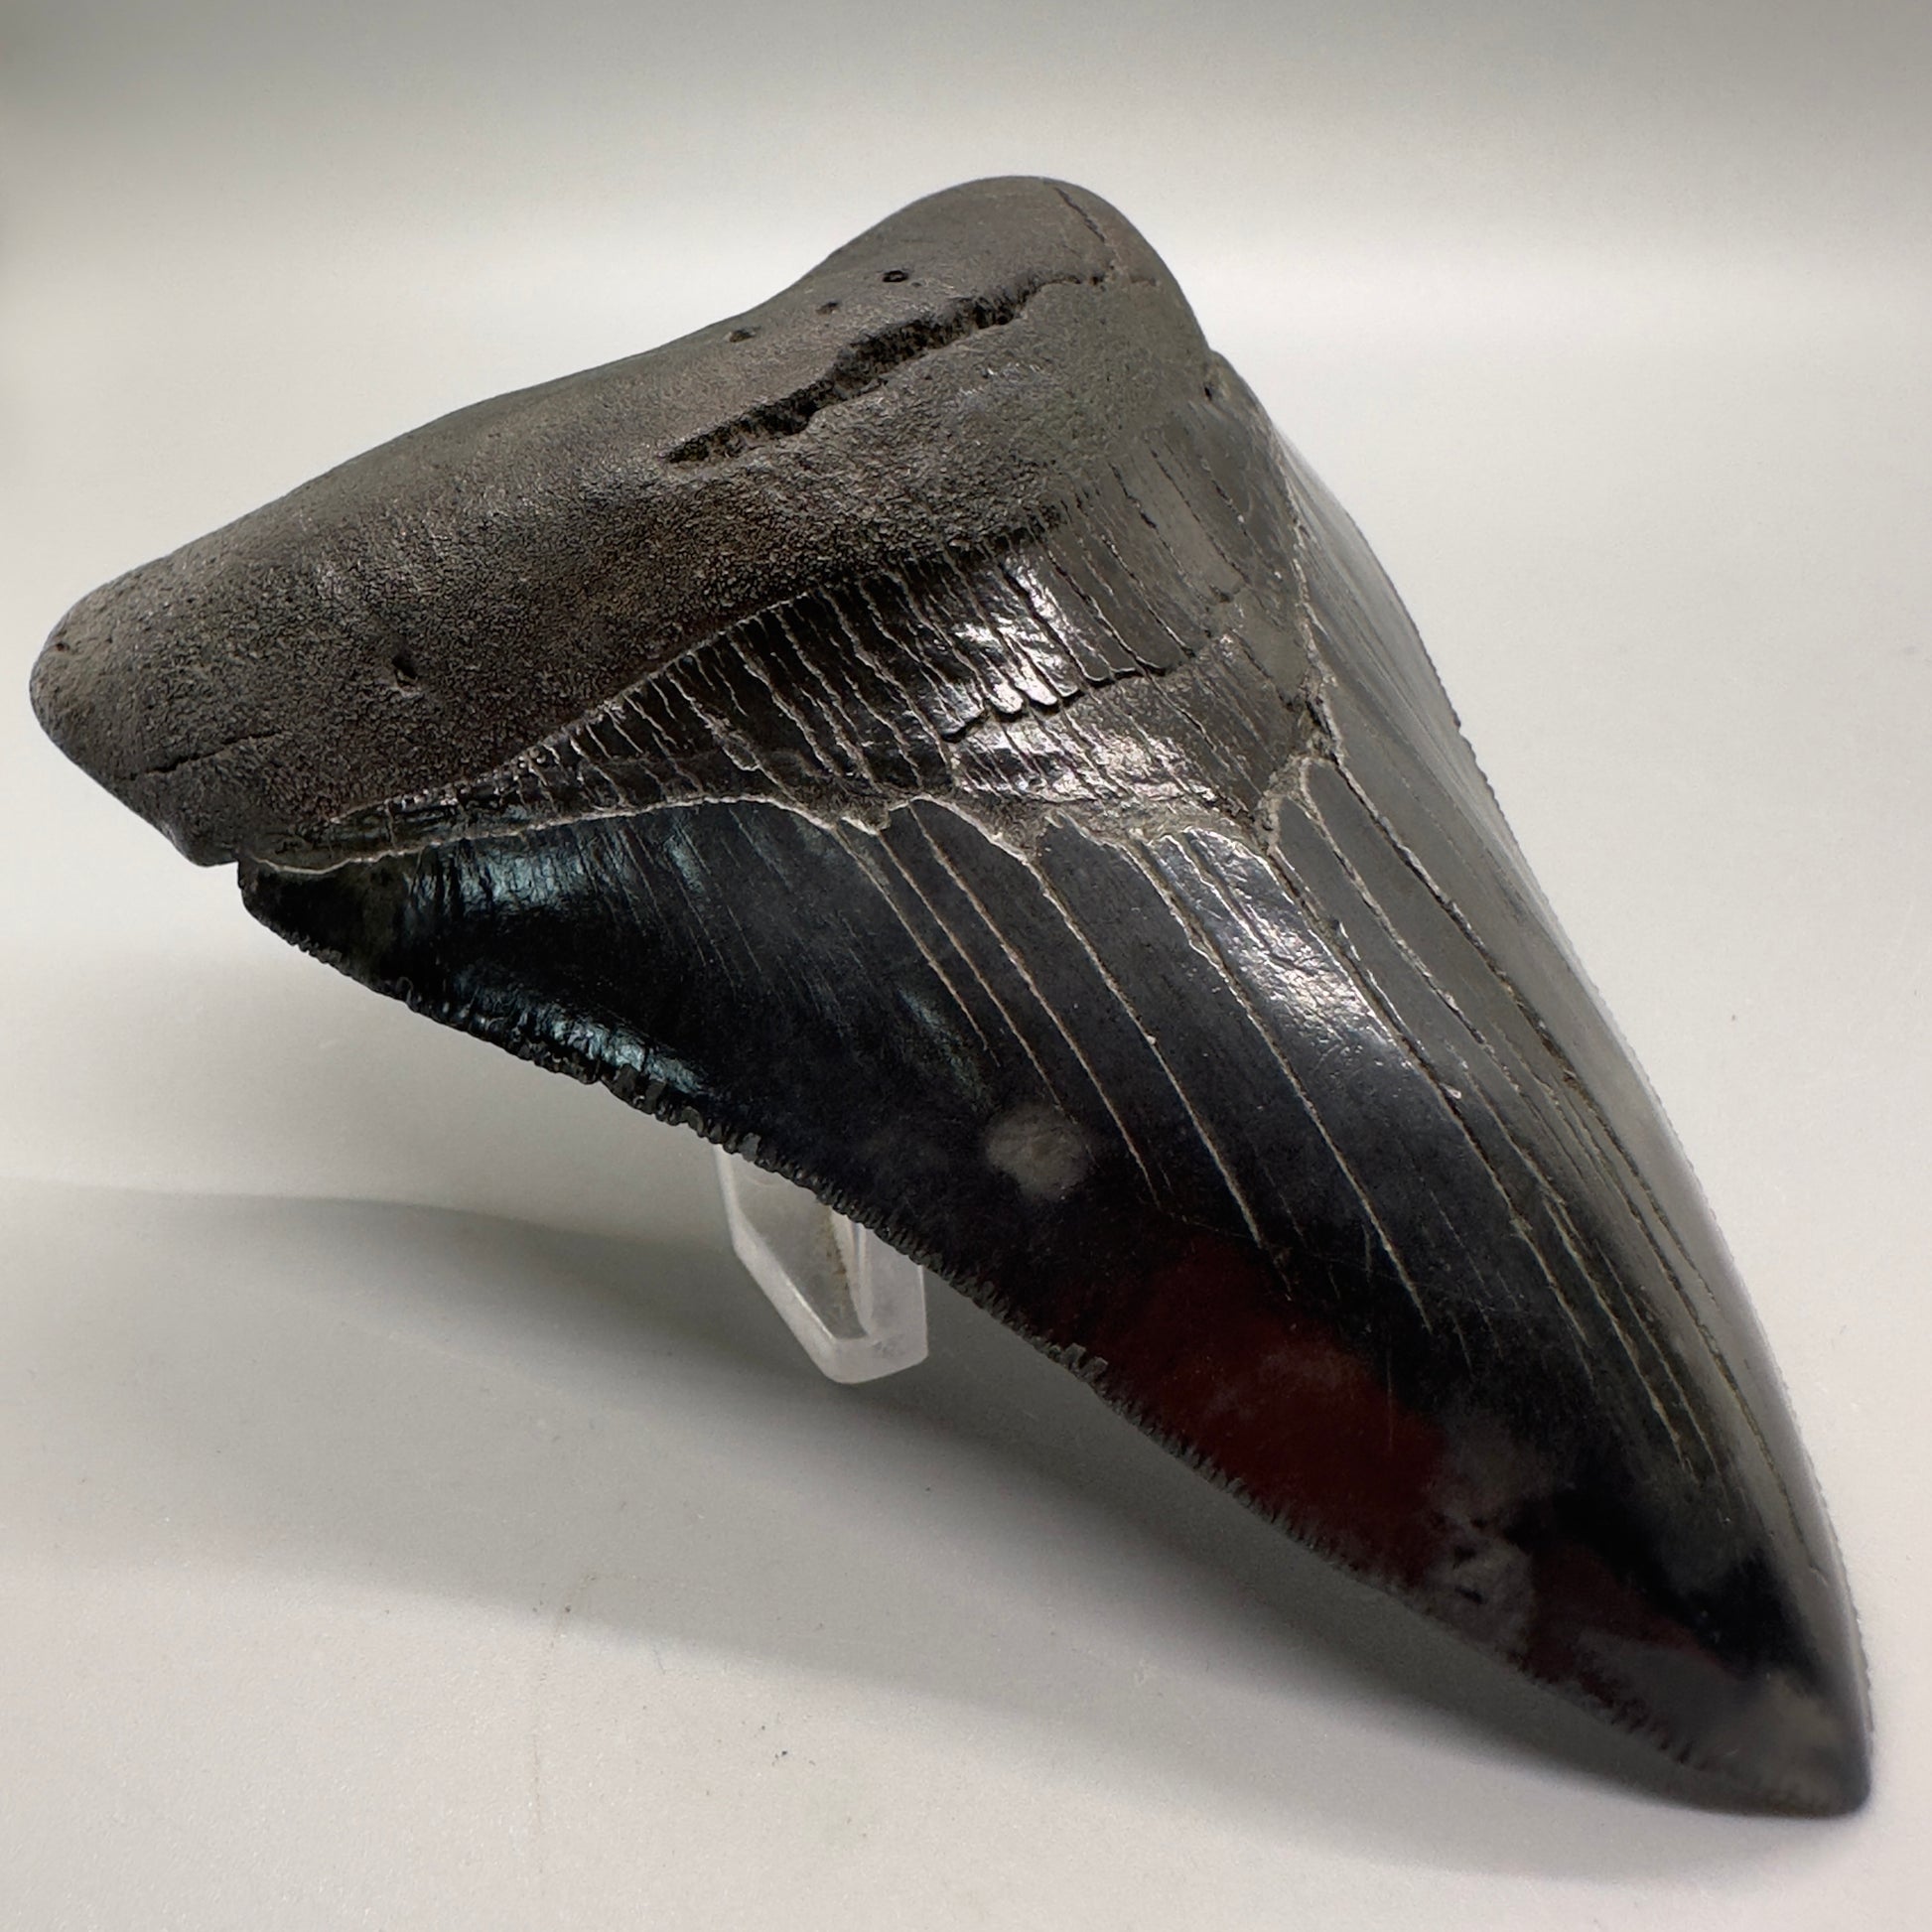 Dark colors 4.47" Fossil Megalodon Tooth: Scuba Diving Discovery from South Carolina CM4618 - Front right